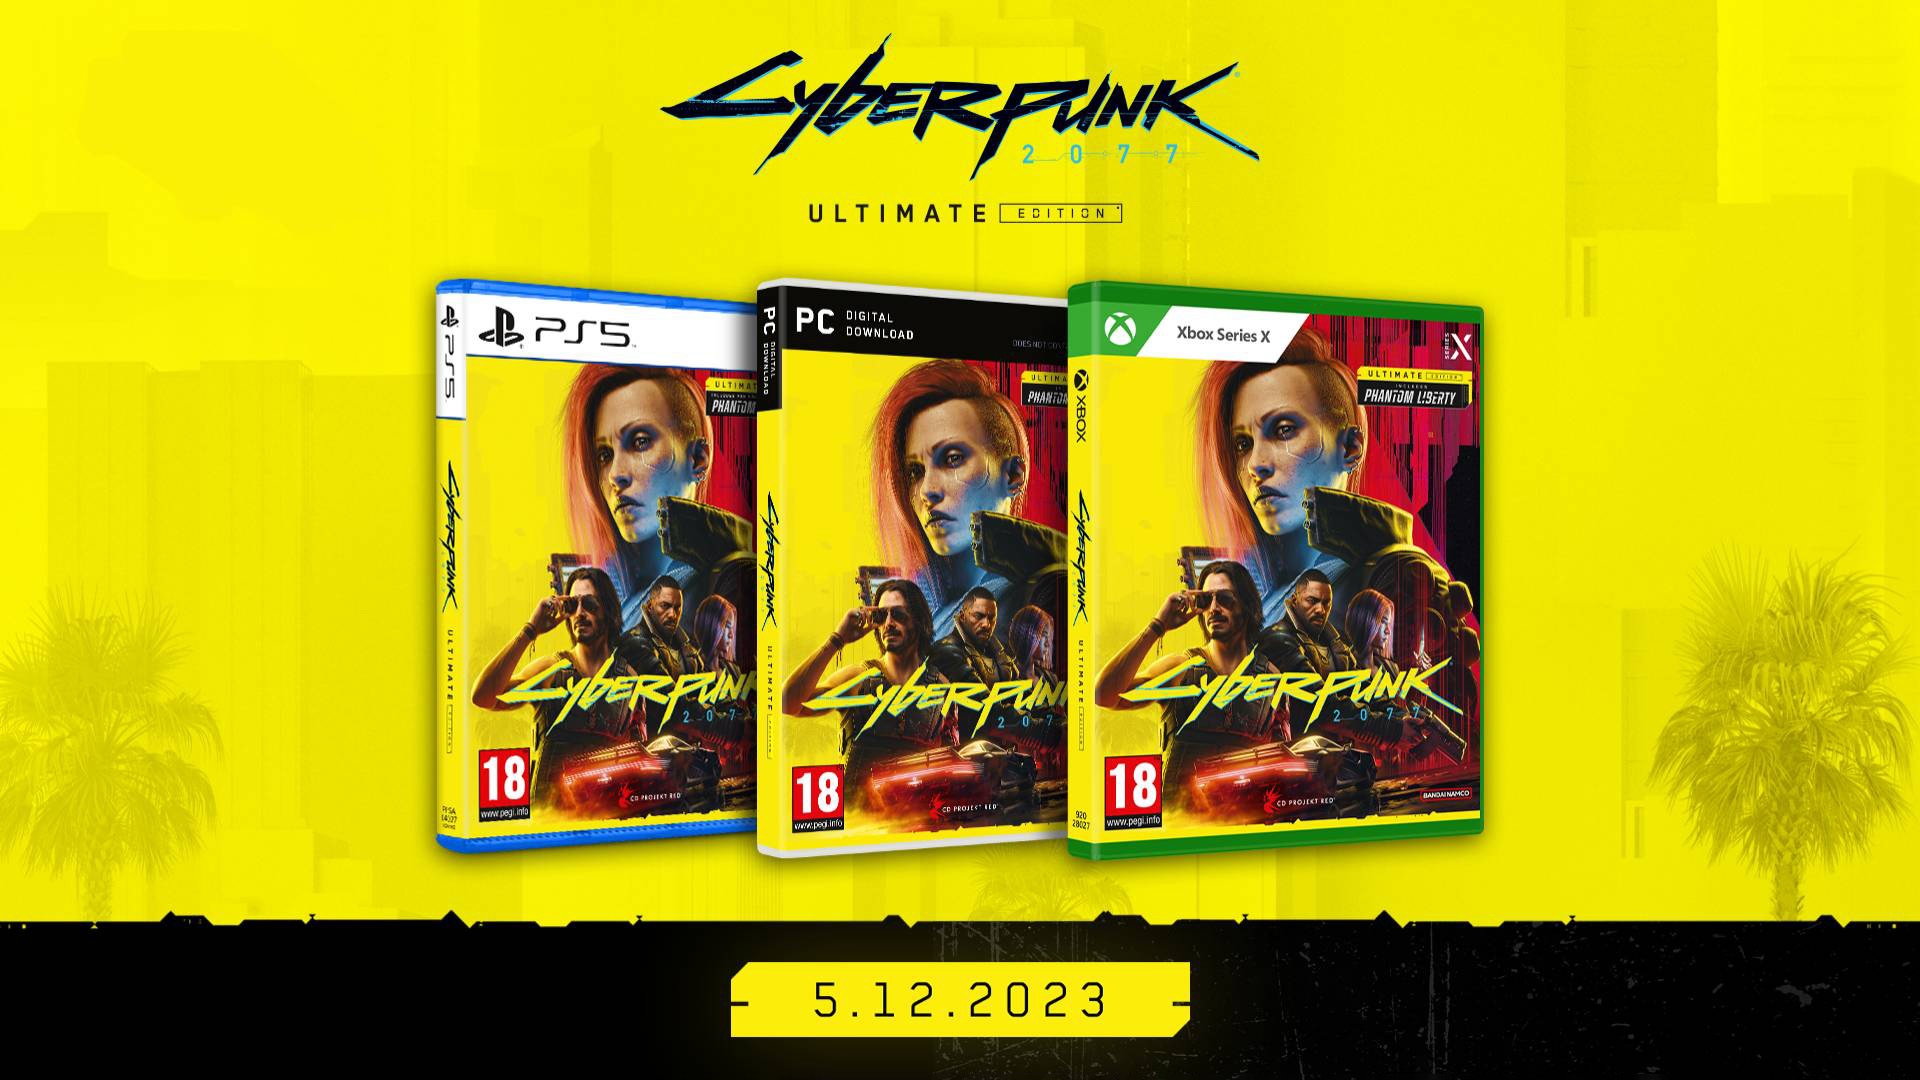 Cyberpunk 2077 Ultimate Edition is available starting December 5, 2023